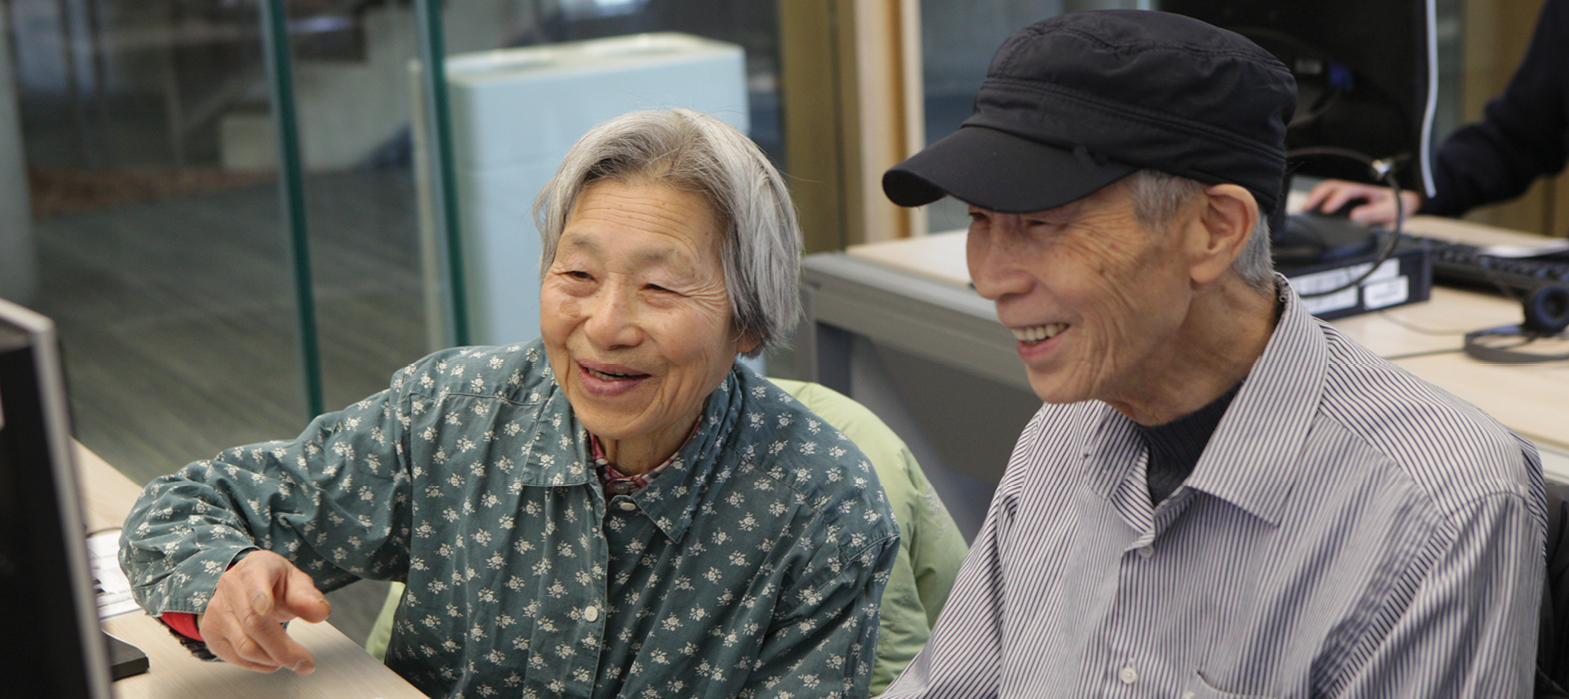 two smiling seniors looking at a computer